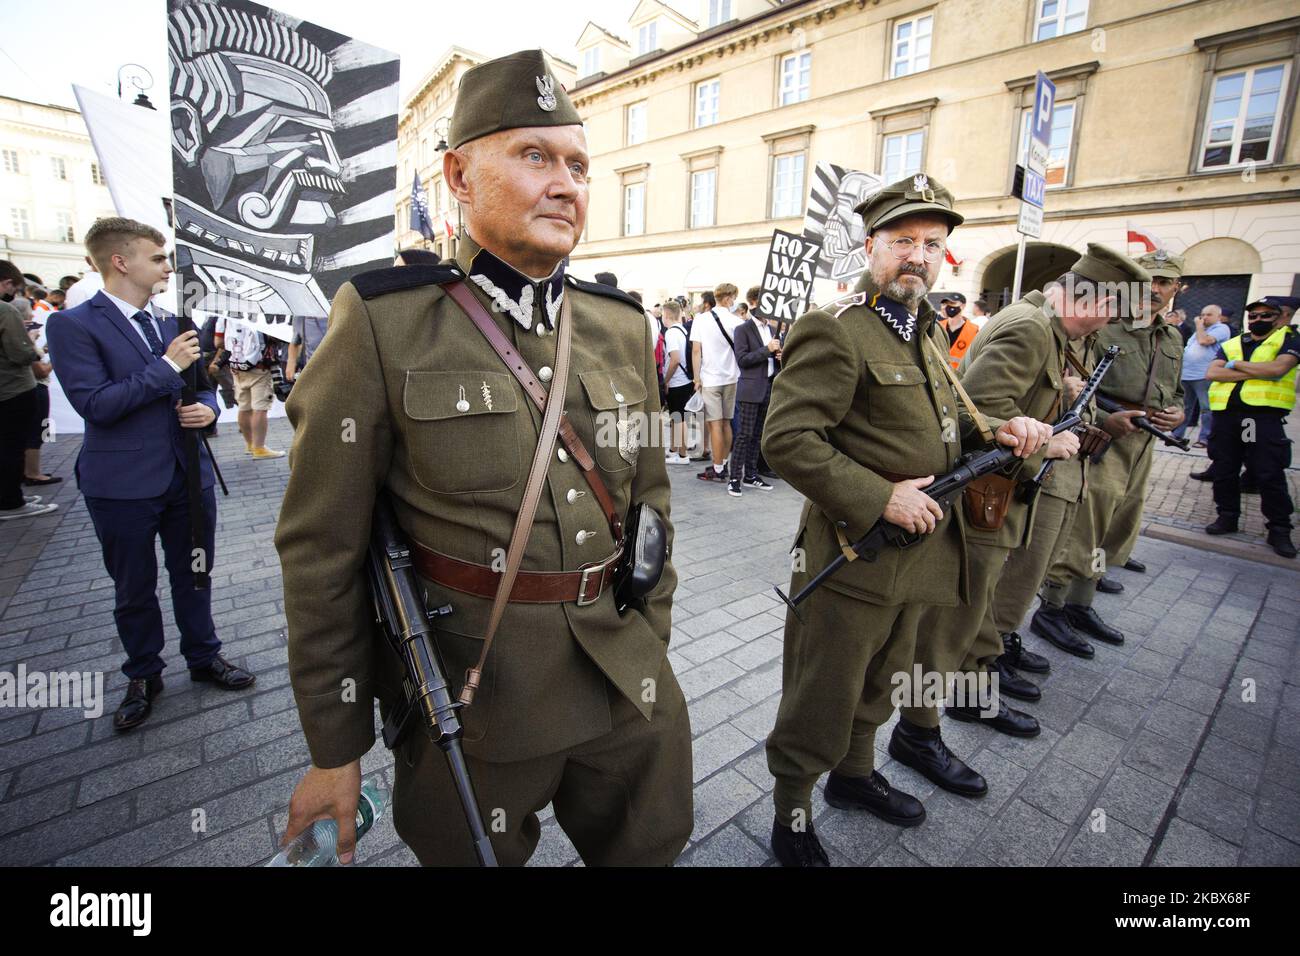 Men dressed in old, Polish army uniforms are seen ahead of a march in Warsaw, Poland on August 15, 2020. The far-right and ultranationalist youth organisation organized a march on Saturday in light of the 100th anniversary of the Battle of Warsaw, the battle that turned the tide on the Bolshevik invasion of Europe. The All Polish Youth also oppose liberal values and oppose non-binary gender people who they see as a threat to Polish culture. (Photo by Jaap Arriens/NurPhoto) Stock Photo